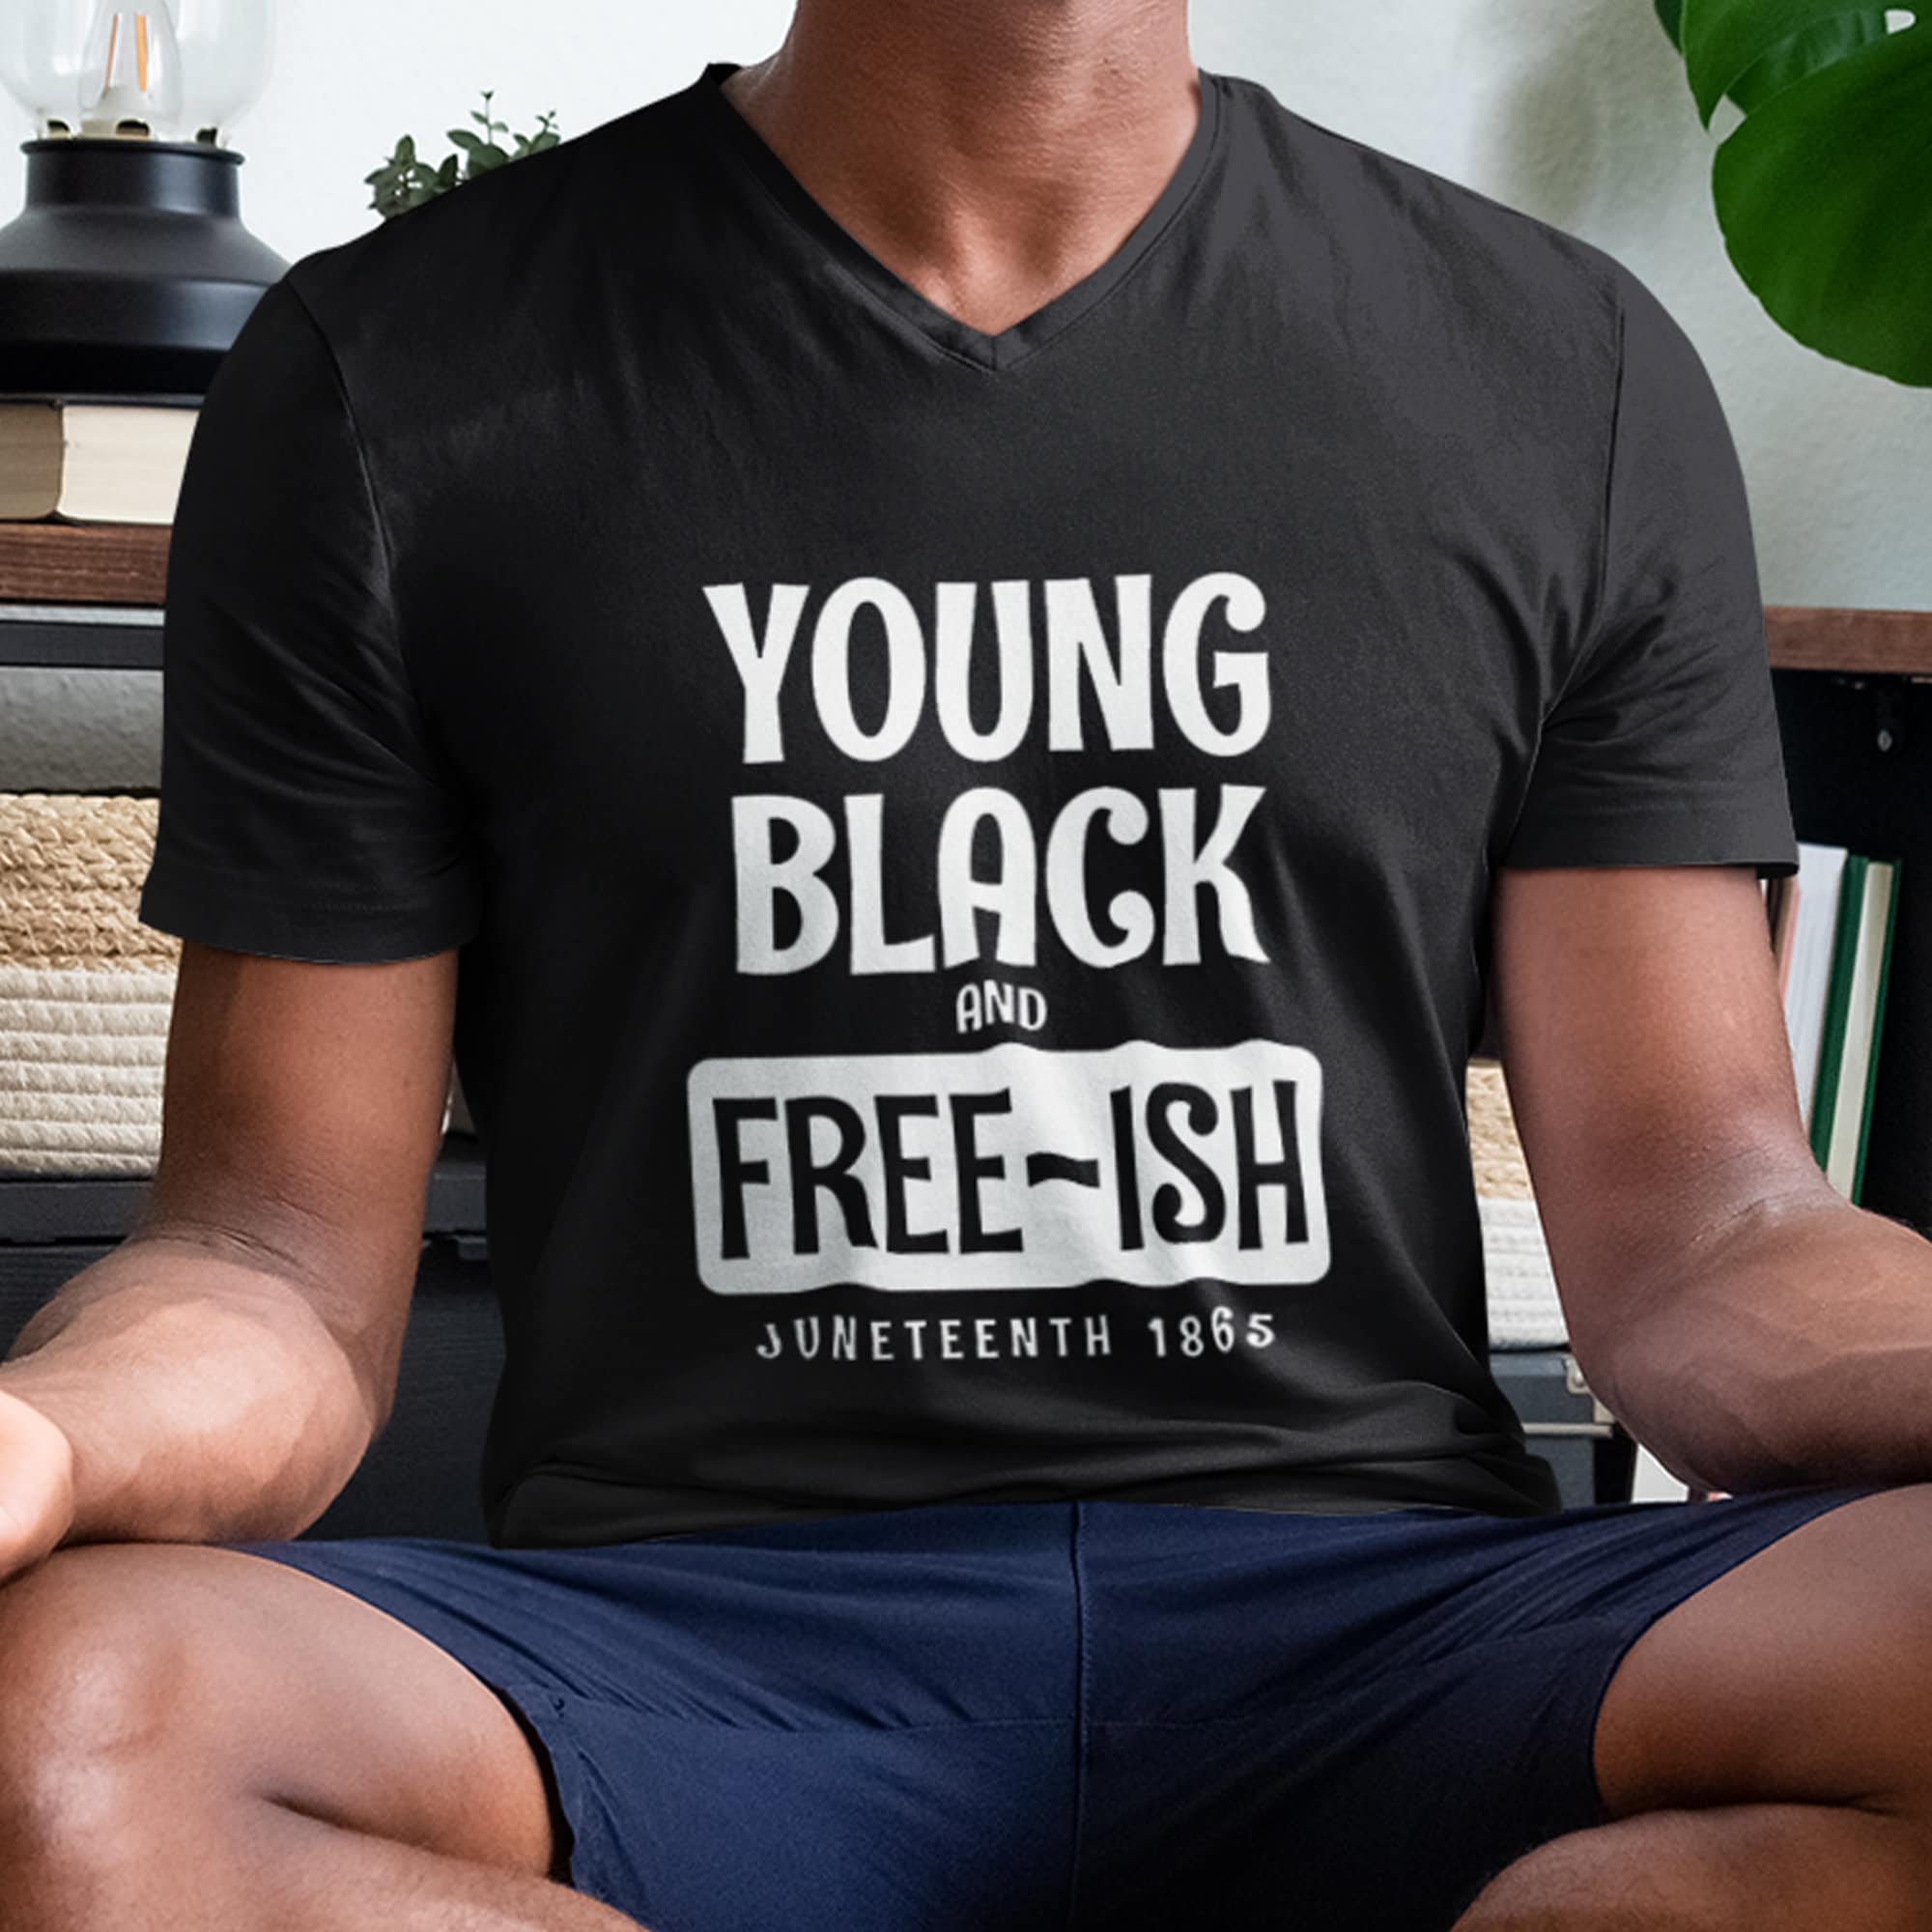 HeatherModel Juneteenth Shirt, Juneteenth 1865 Tee, Freeish Since 1865, Funny Black History Month Tshirt, Unisex Free Black People, G Long Sleeve MSG( Contact ME)